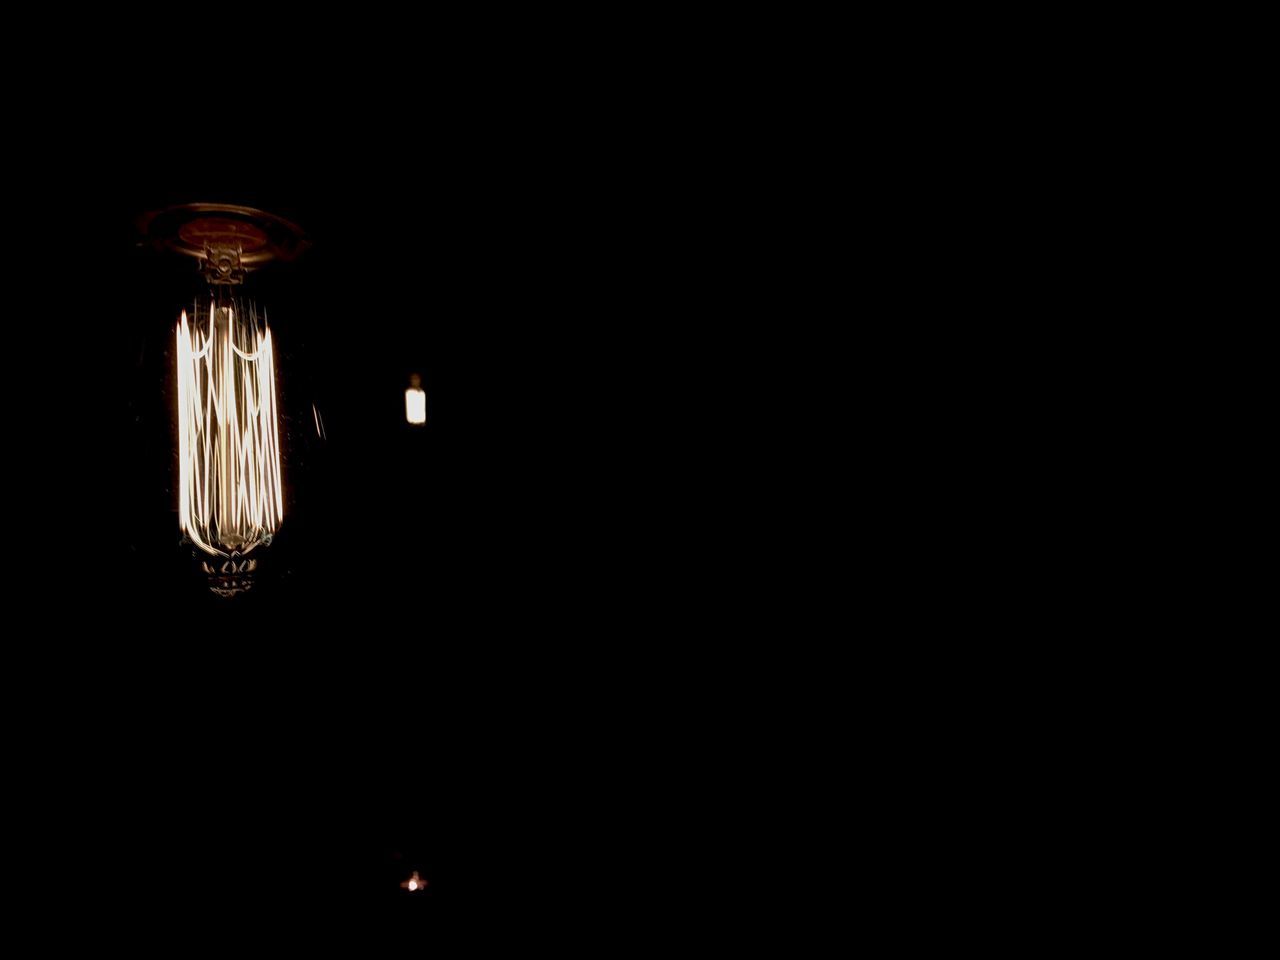 LOW ANGLE VIEW OF ILLUMINATED LIGHT BULB IN DARK